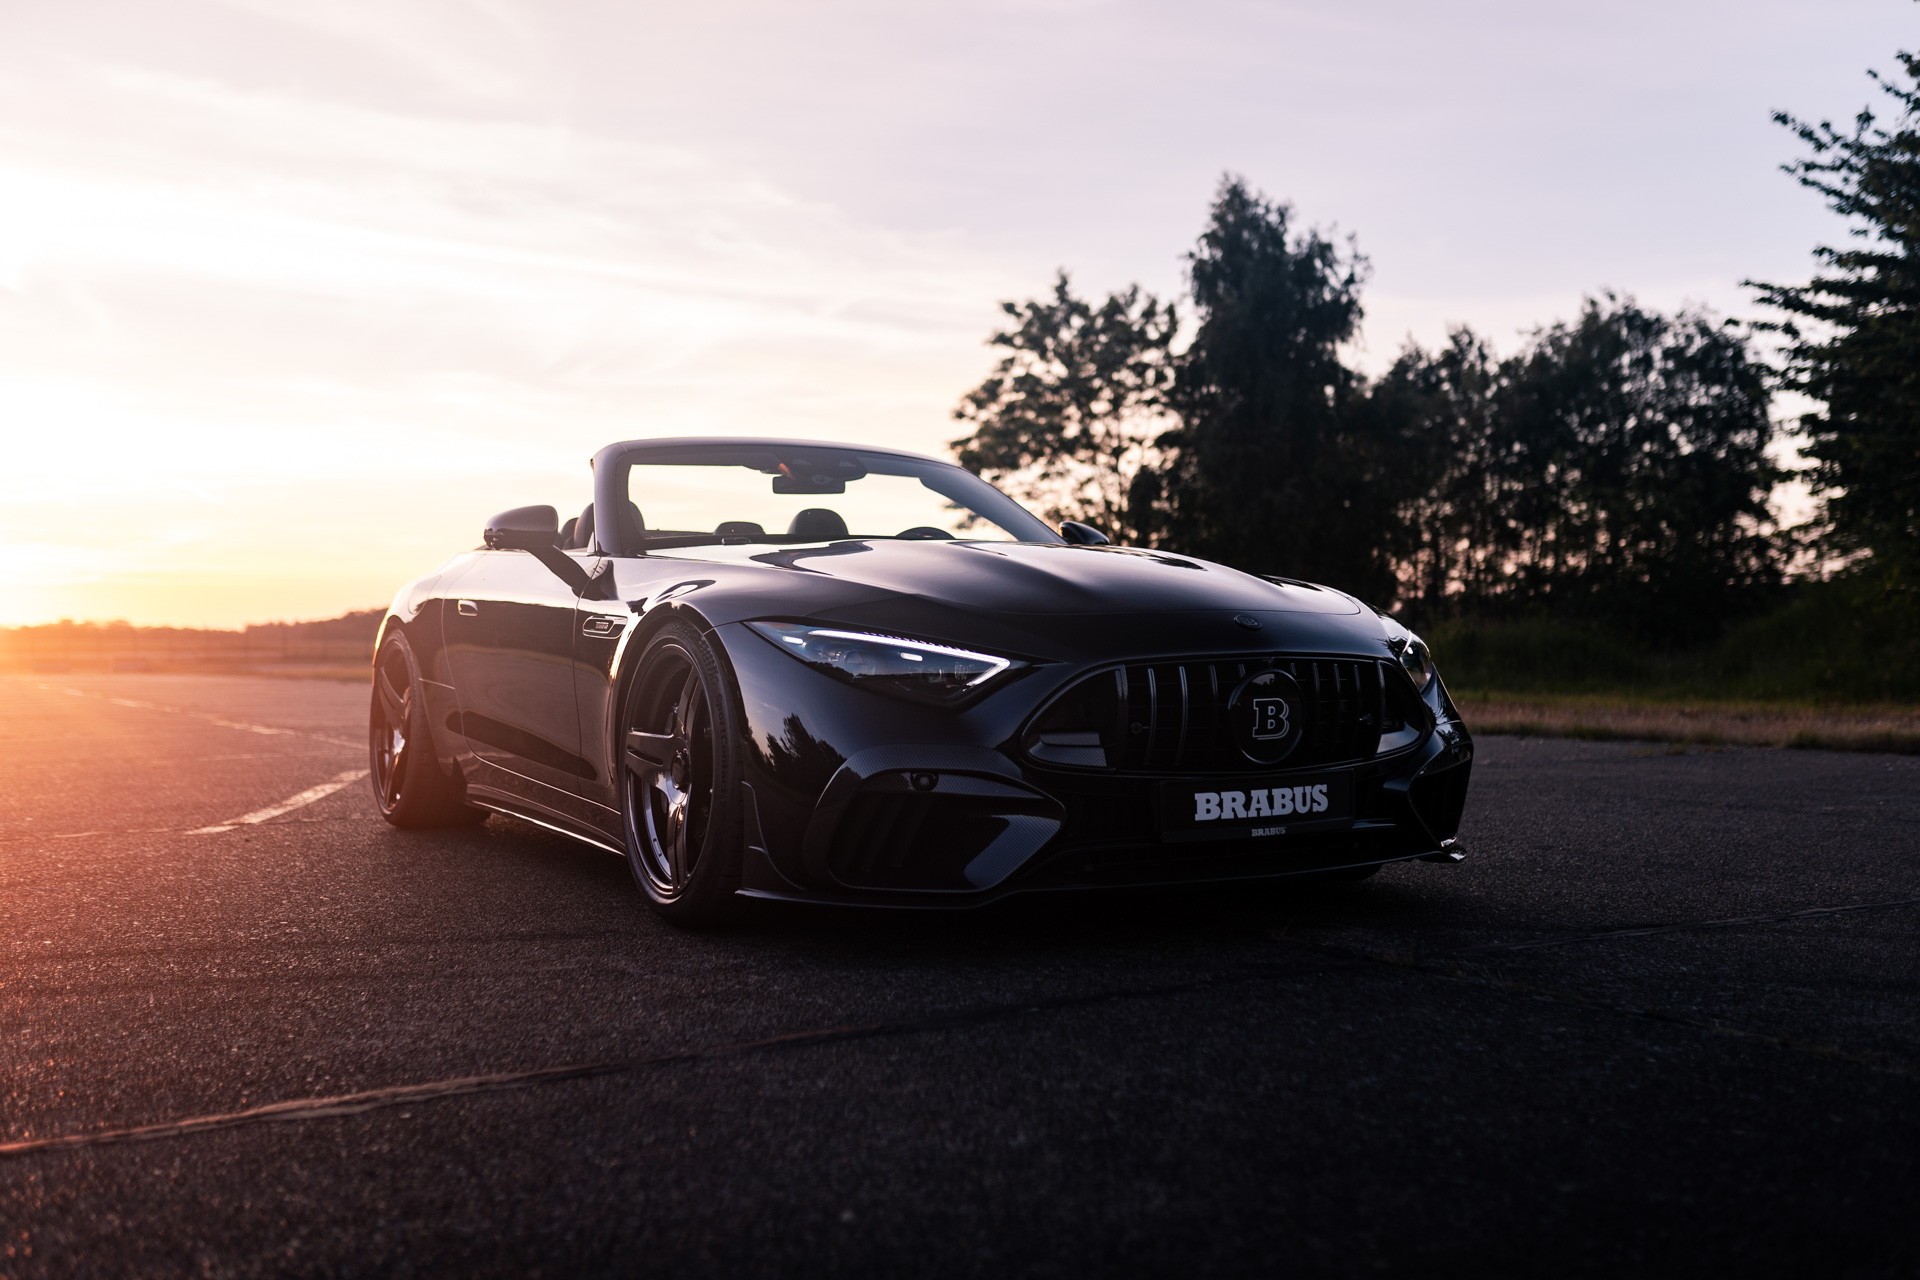 new brabus 750 bodo buschmann is a tuned mercedes amg sl 63 with an eye watering price tag 4